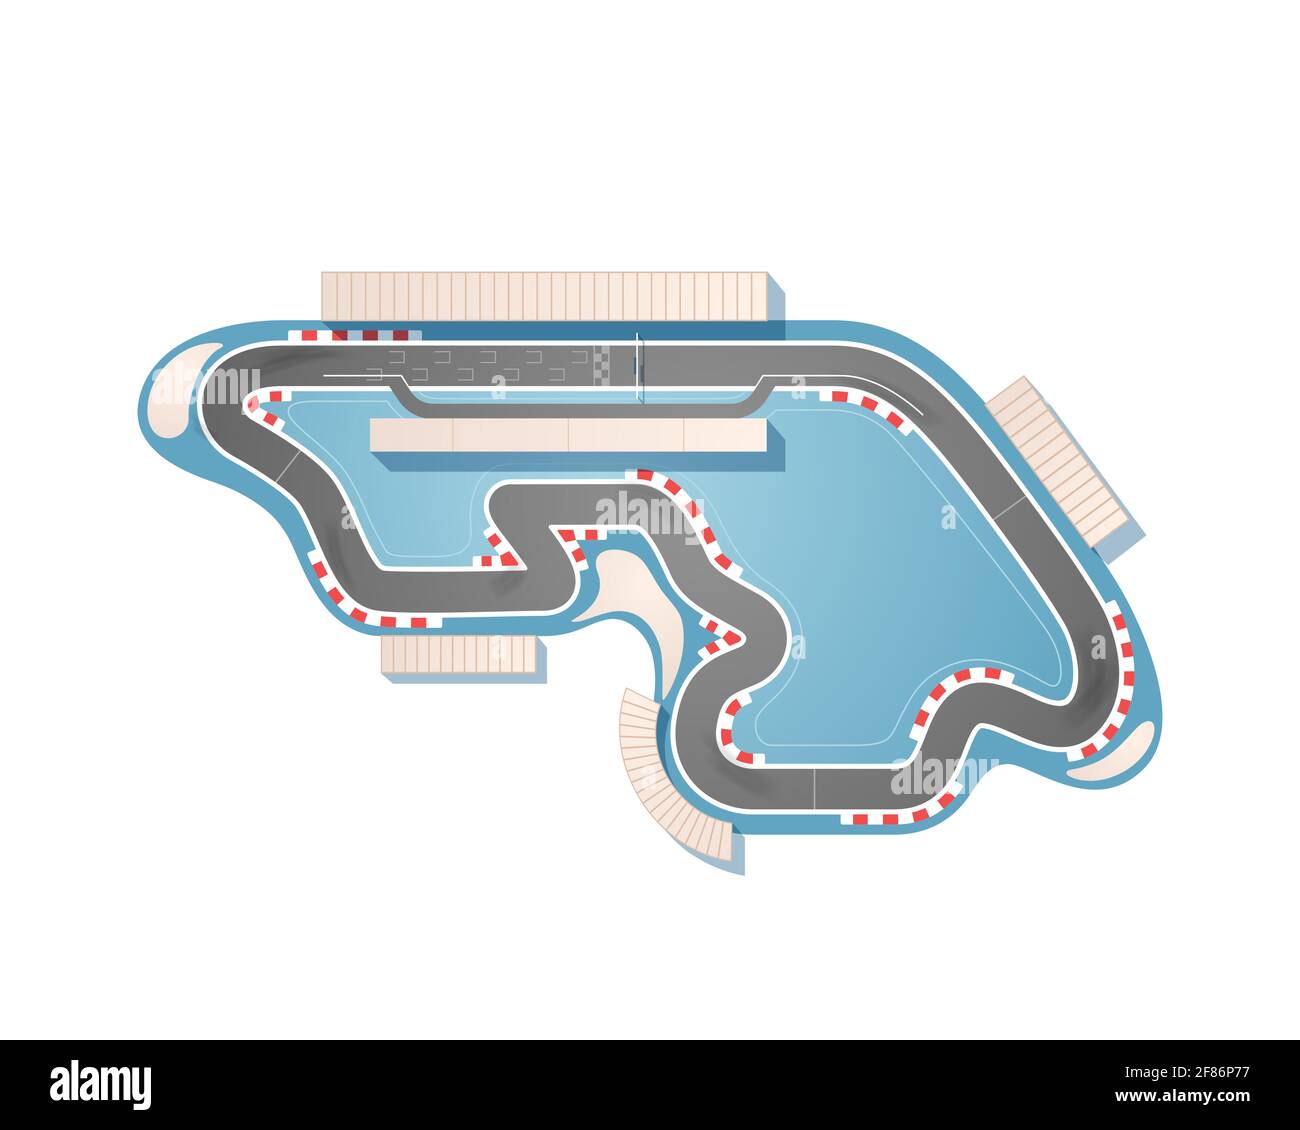 Racing Circuit Cut Out Stock Images & Pictures - Alamy